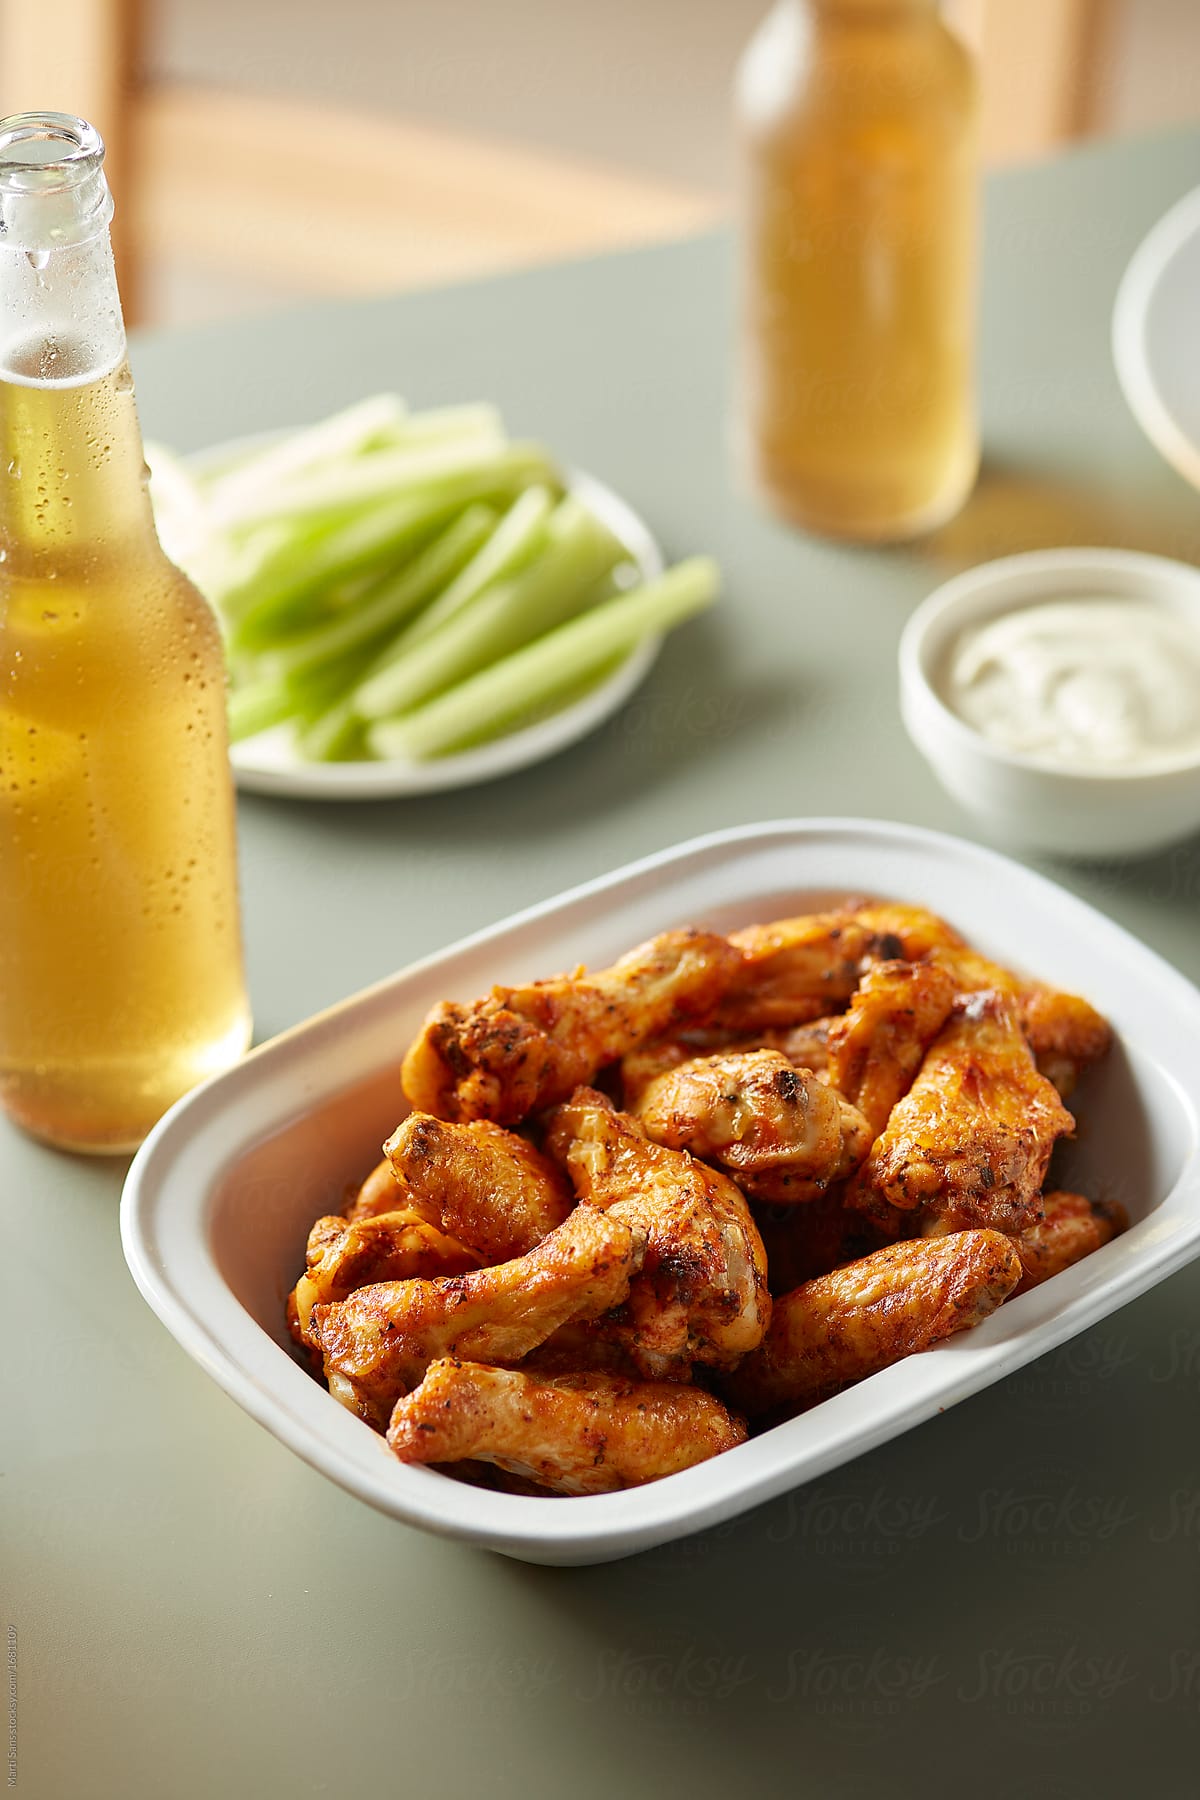 Hot spicy chicken wings with celery and beer.